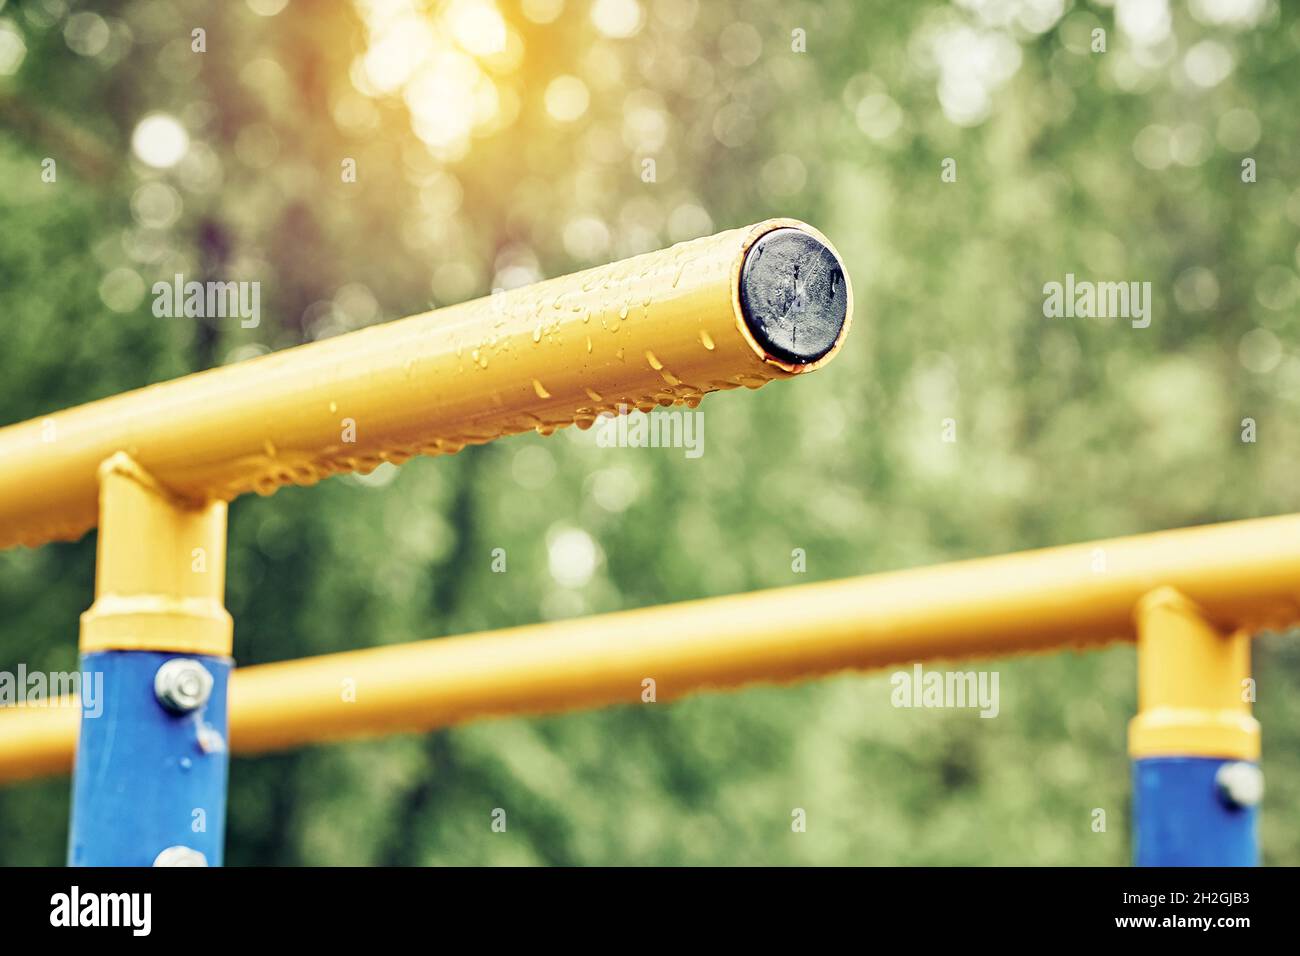 Yellow metal bars for exercises with hanging rain drops at sports ground in spring green park on cloudy day extreme close view Stock Photo